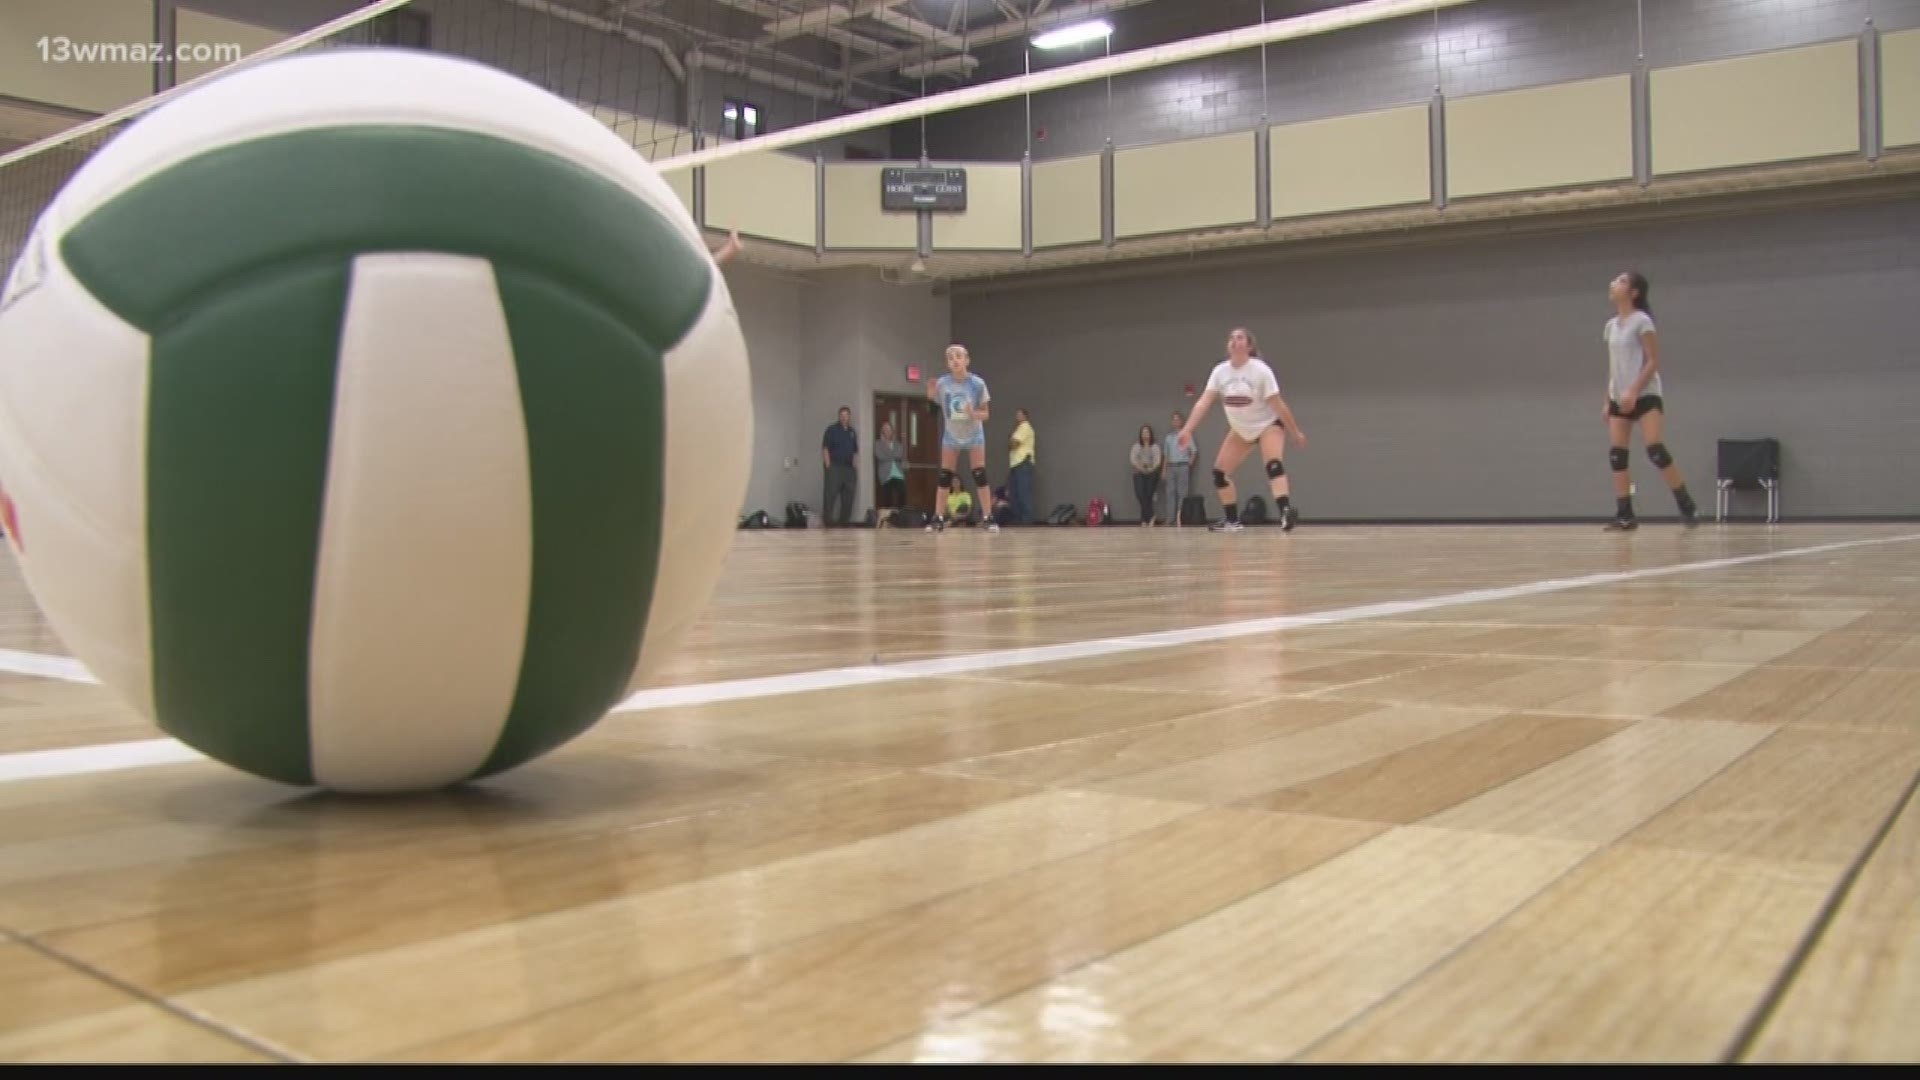 Man hopes to change lack of volleyball programs in Central Georgia